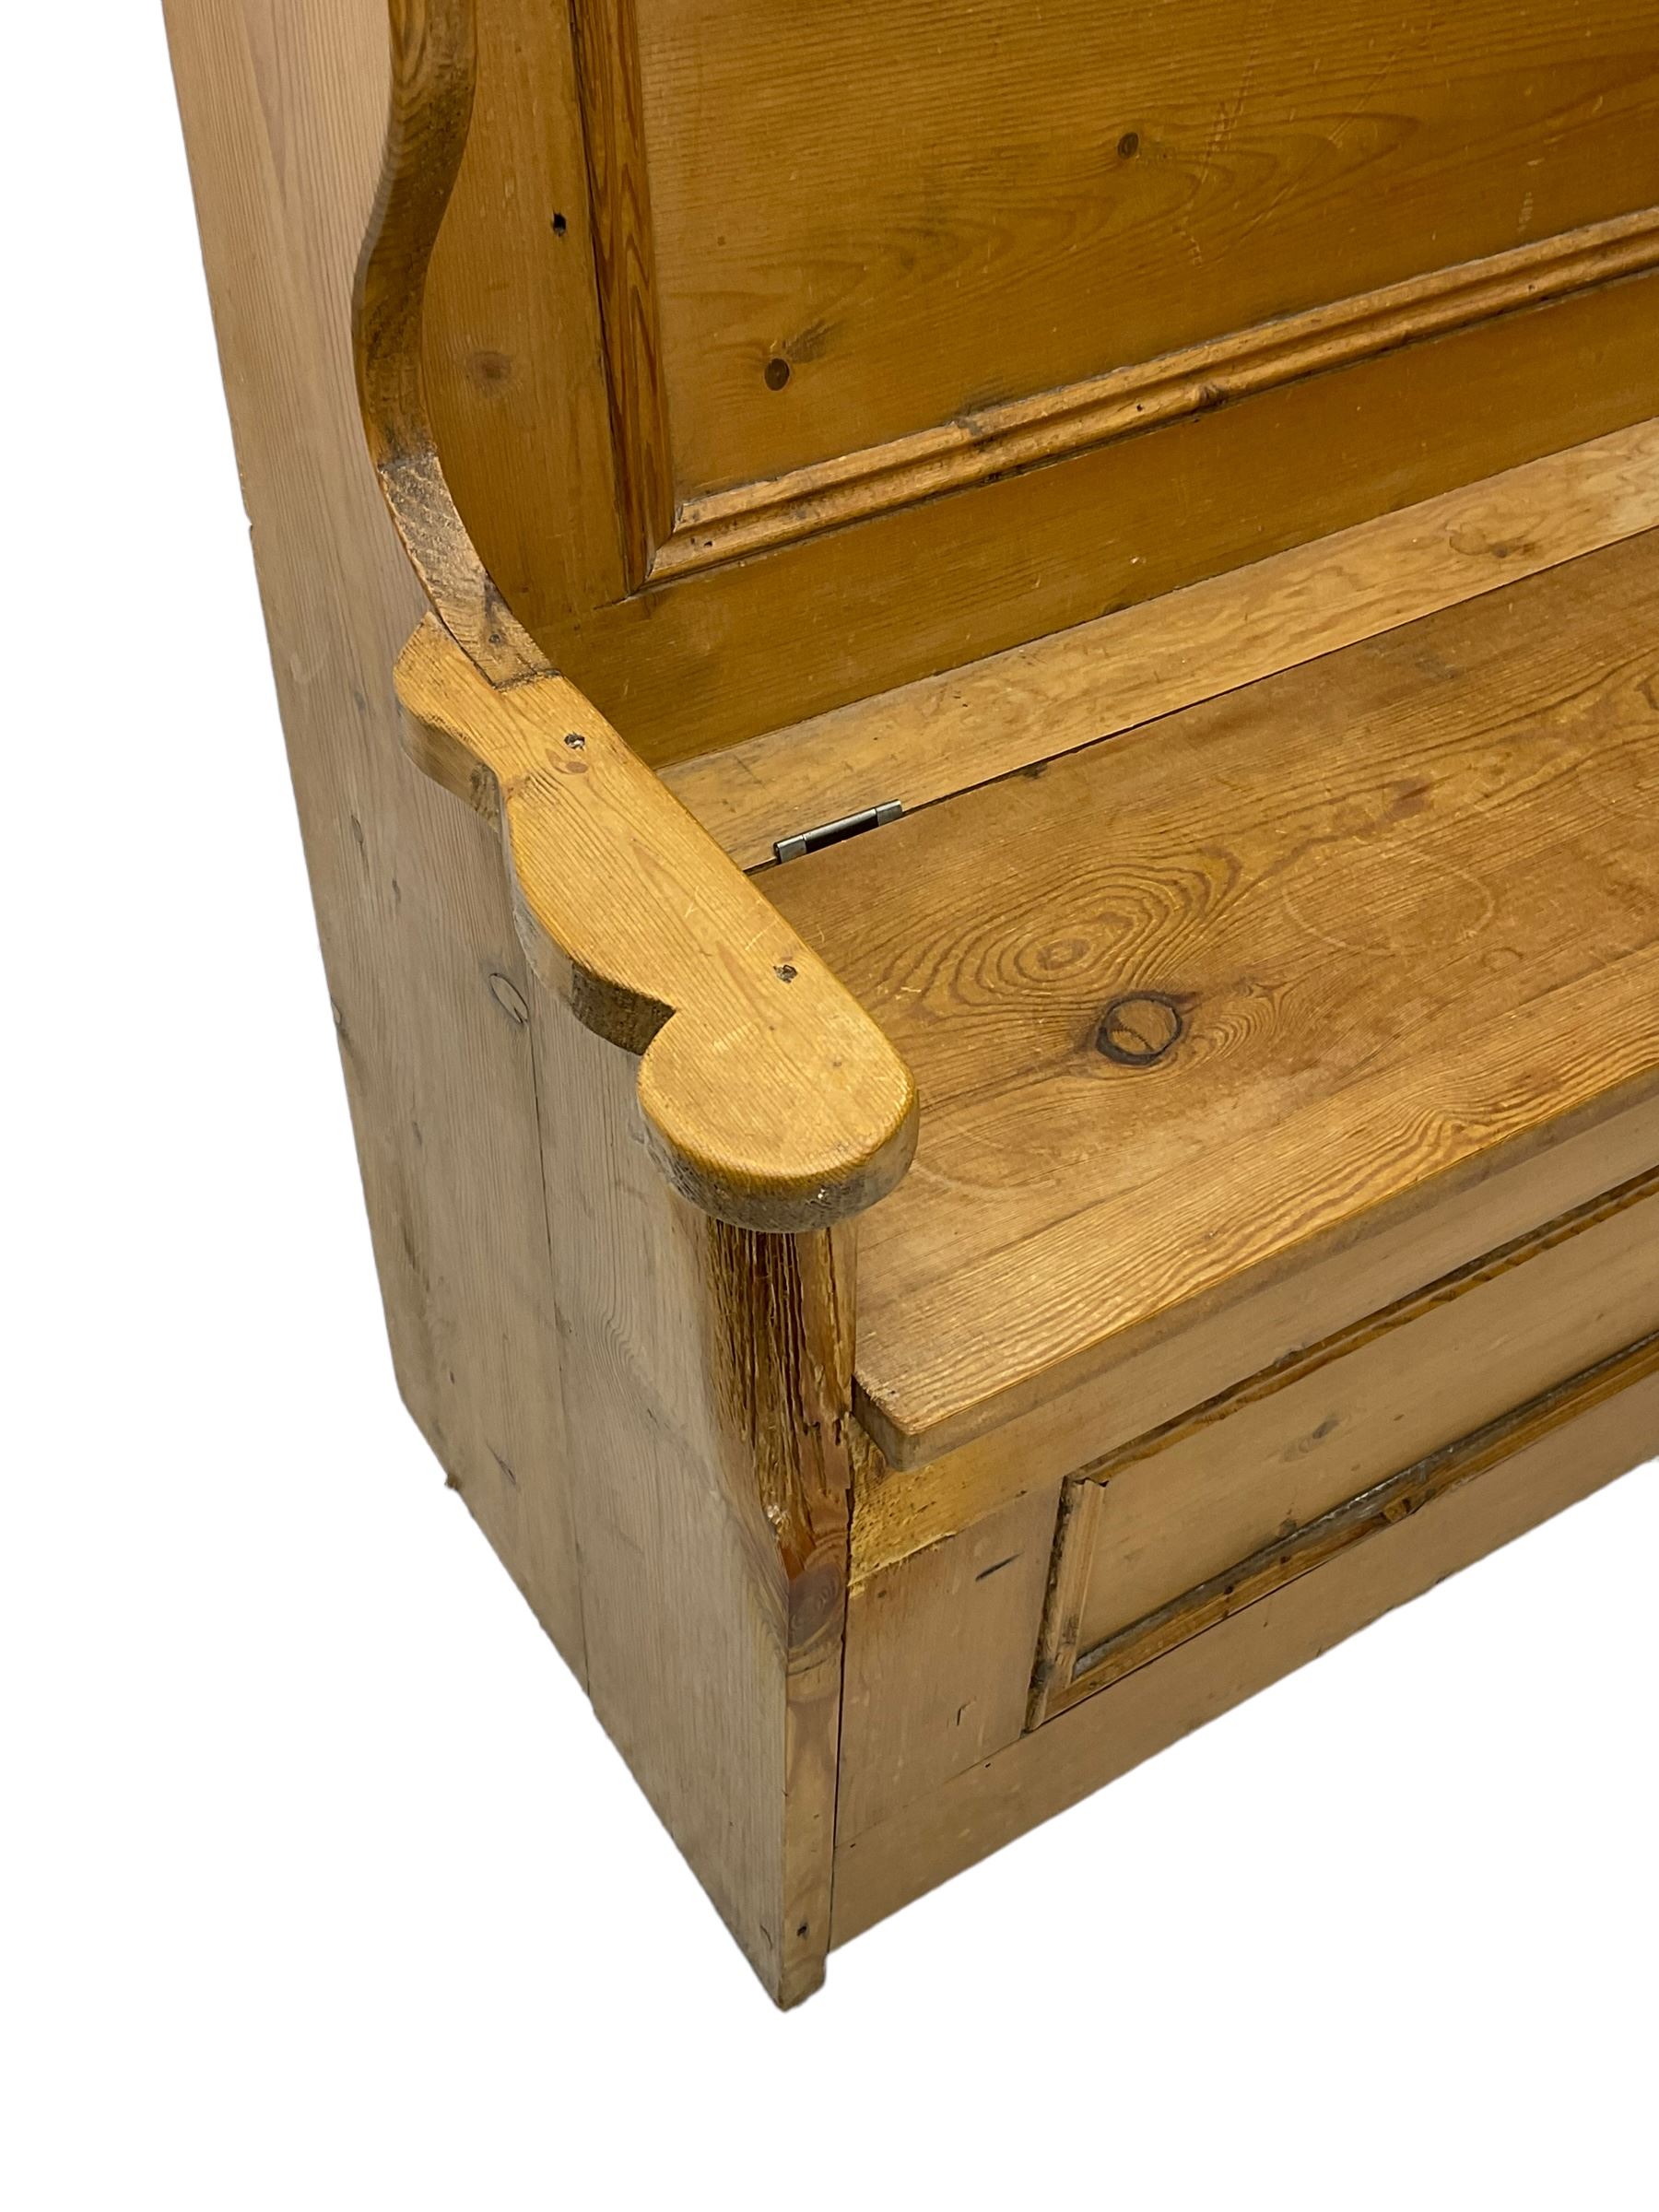 Waxed pine box-seat settle or hall bench - Image 3 of 5